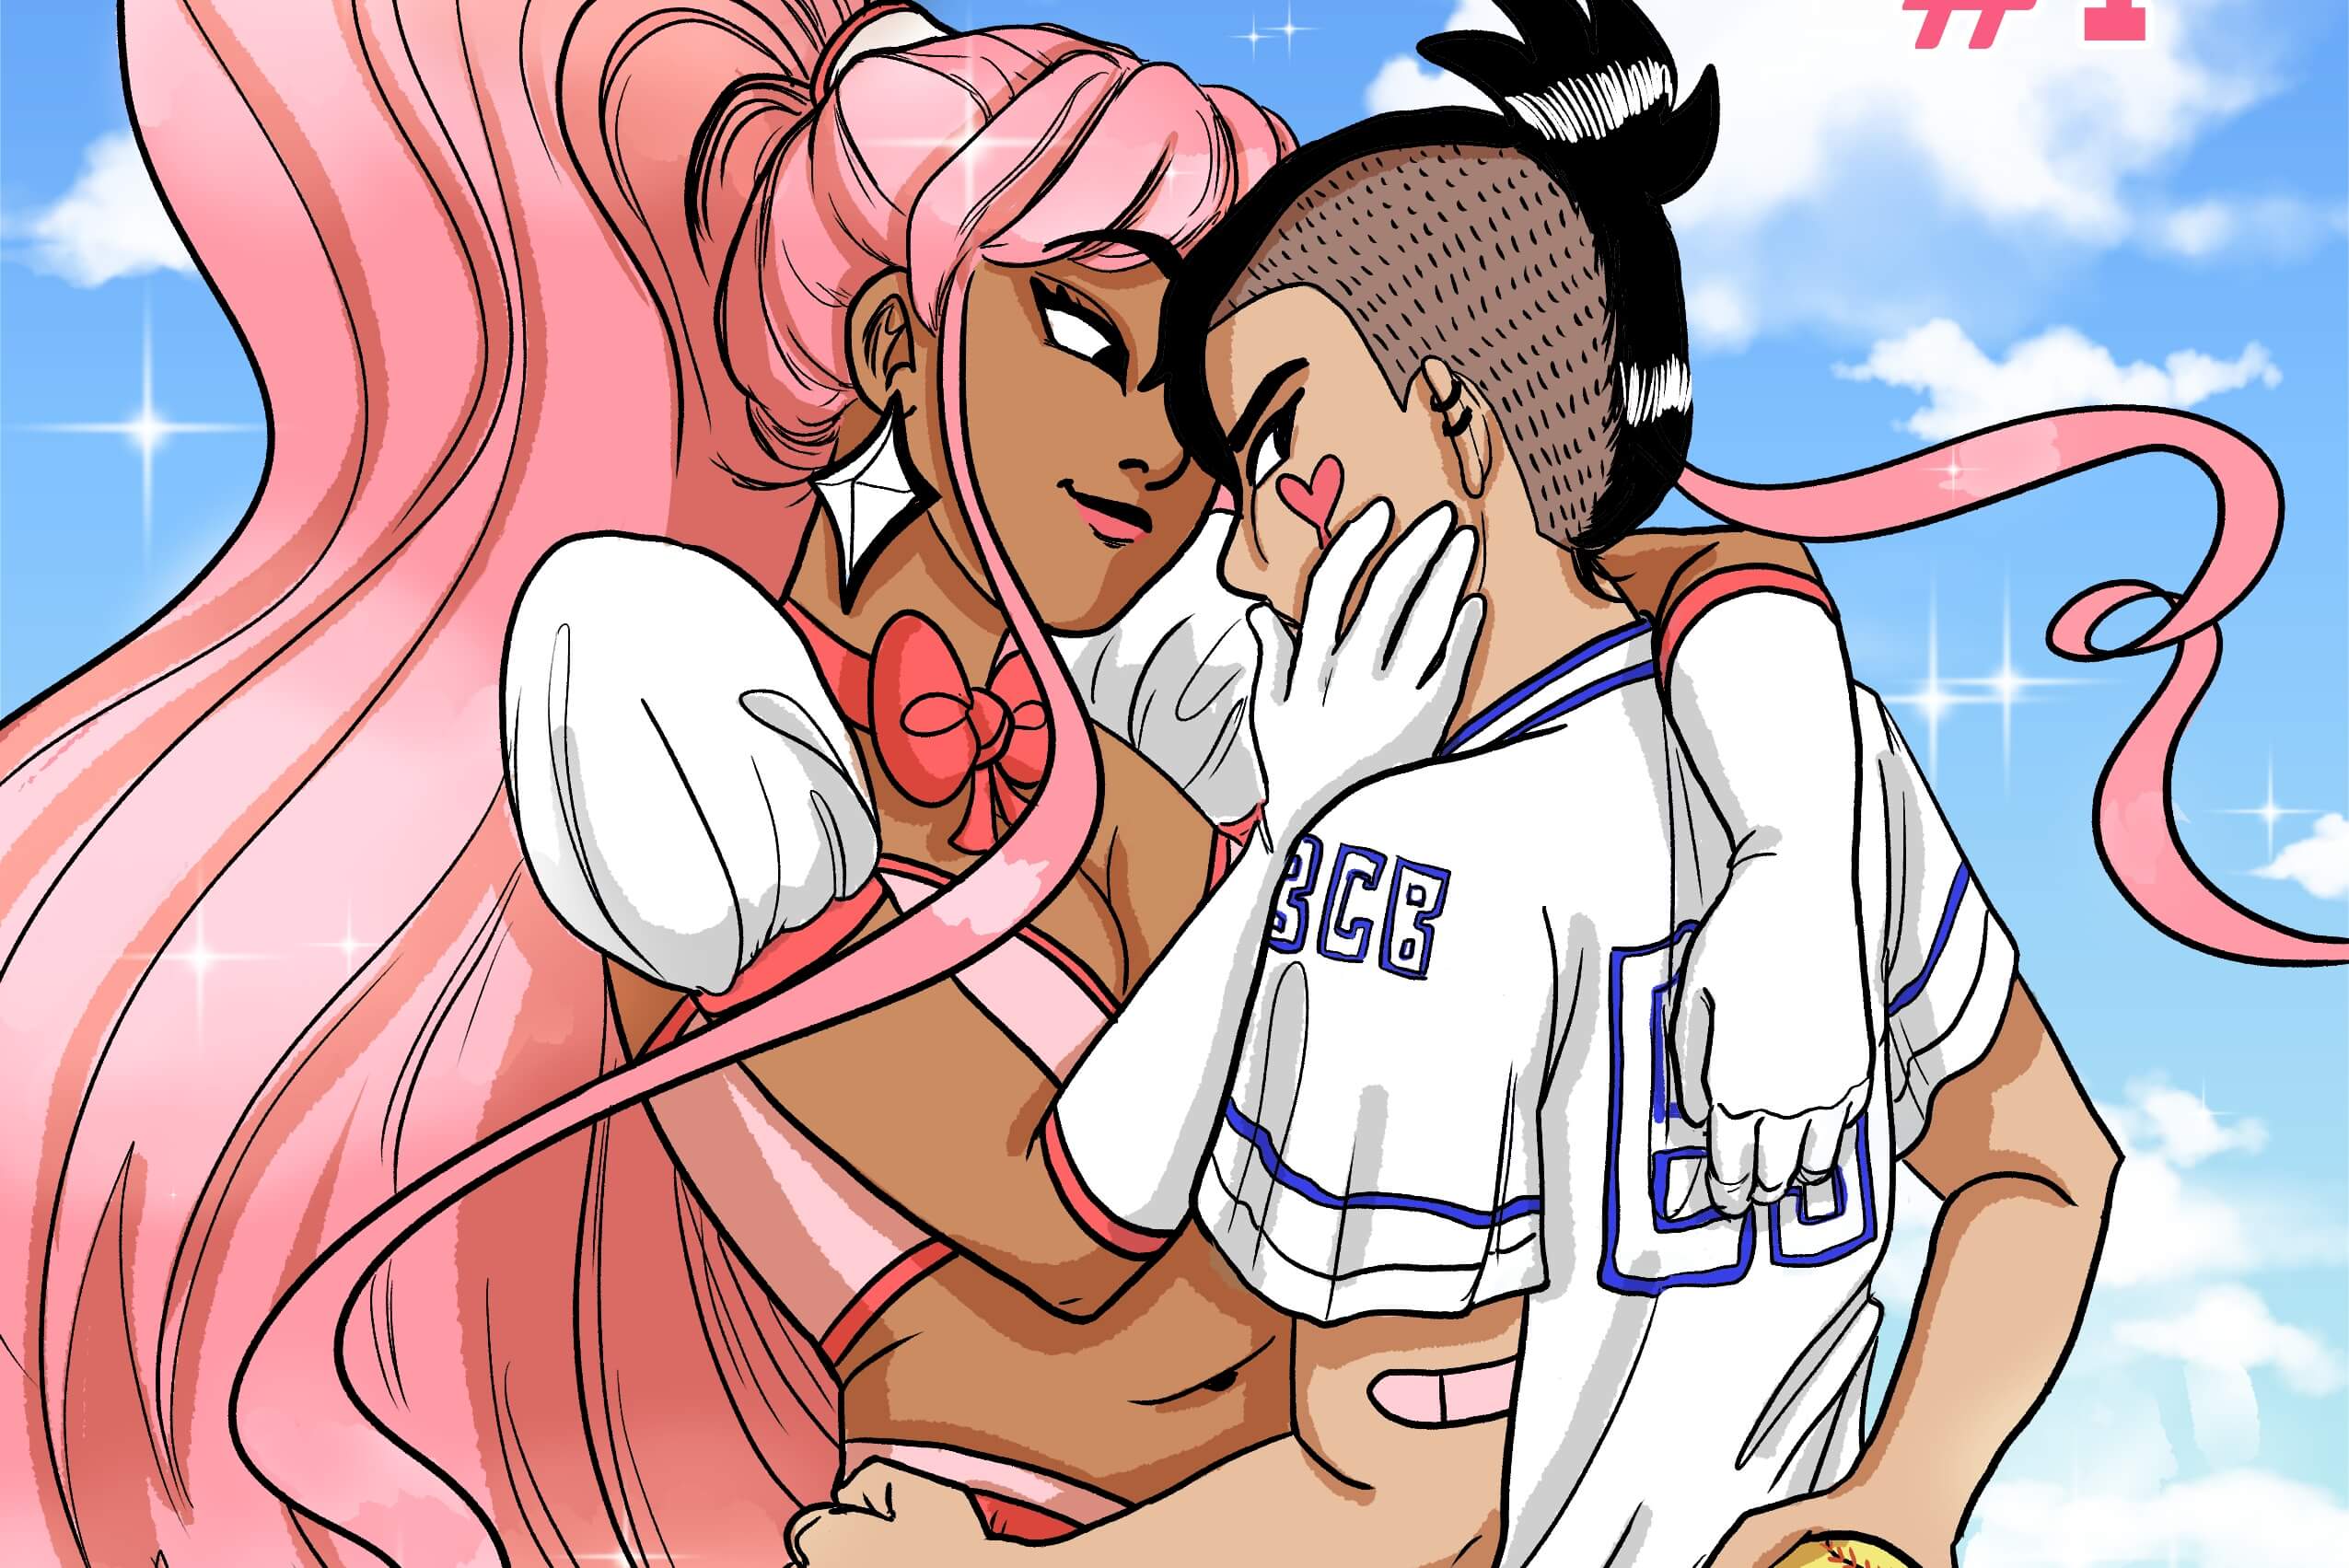 Grandslam Romance #1 Cover by Emma Oosterhous. Gumroad.